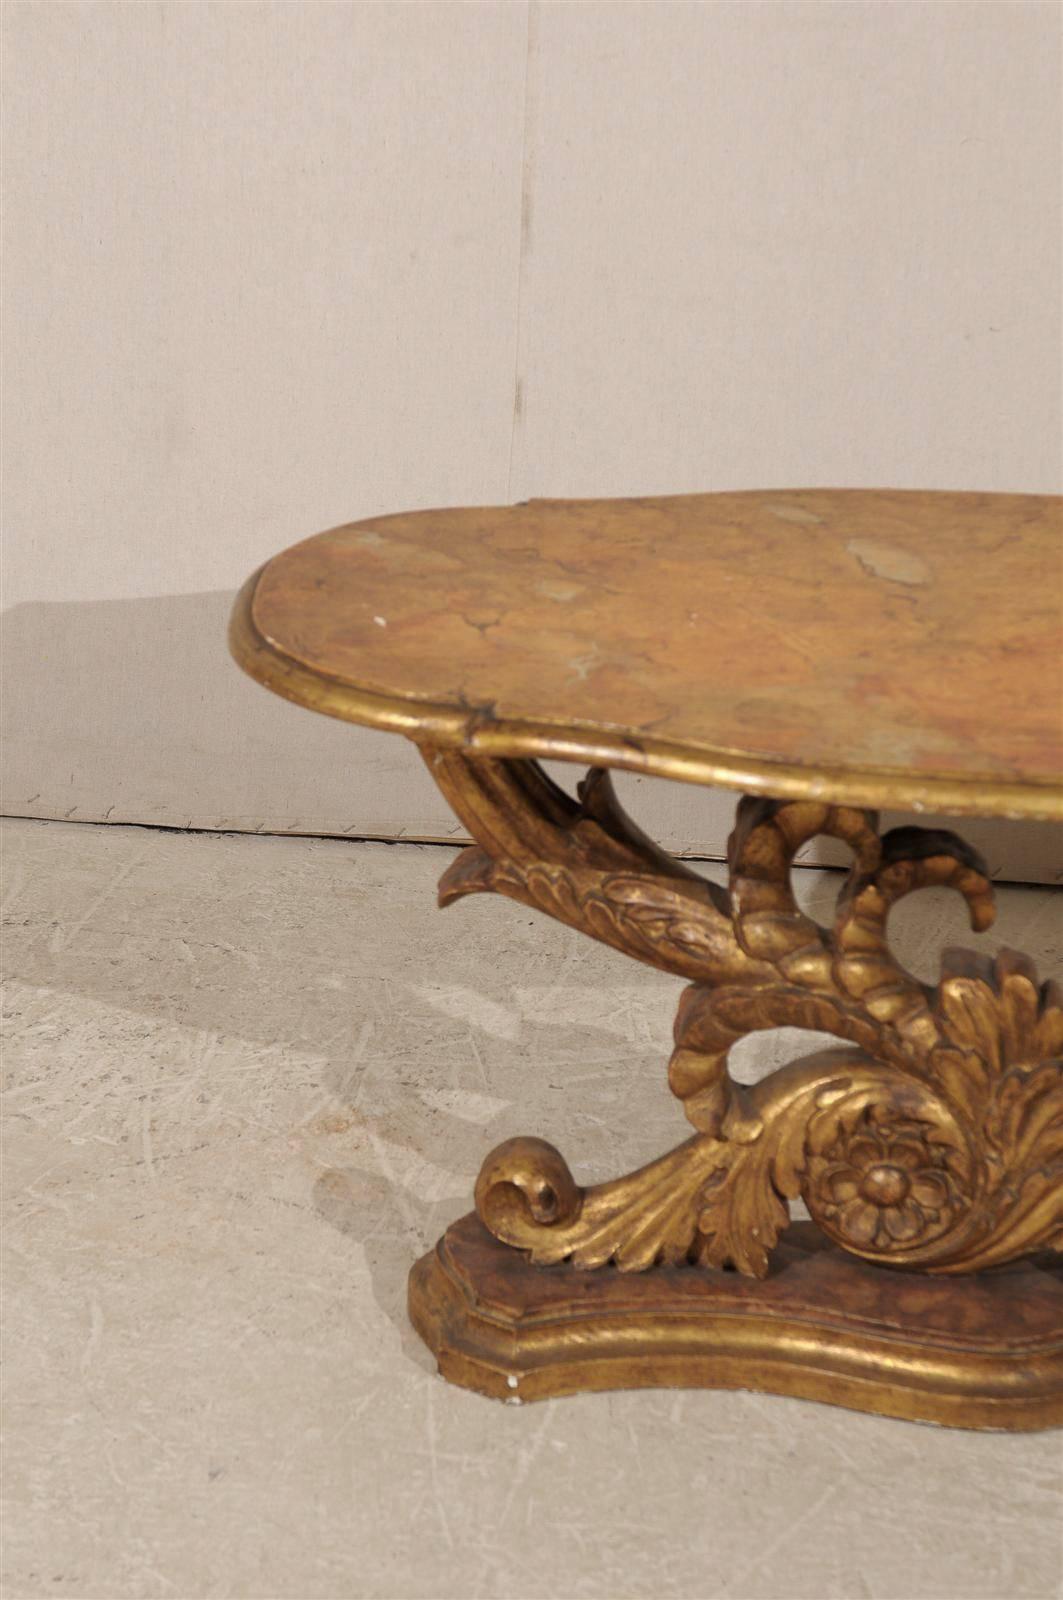 An Italian Mid 19th Century Giltwood Oval Coffee Table with Faux Marble Top In Good Condition For Sale In Atlanta, GA